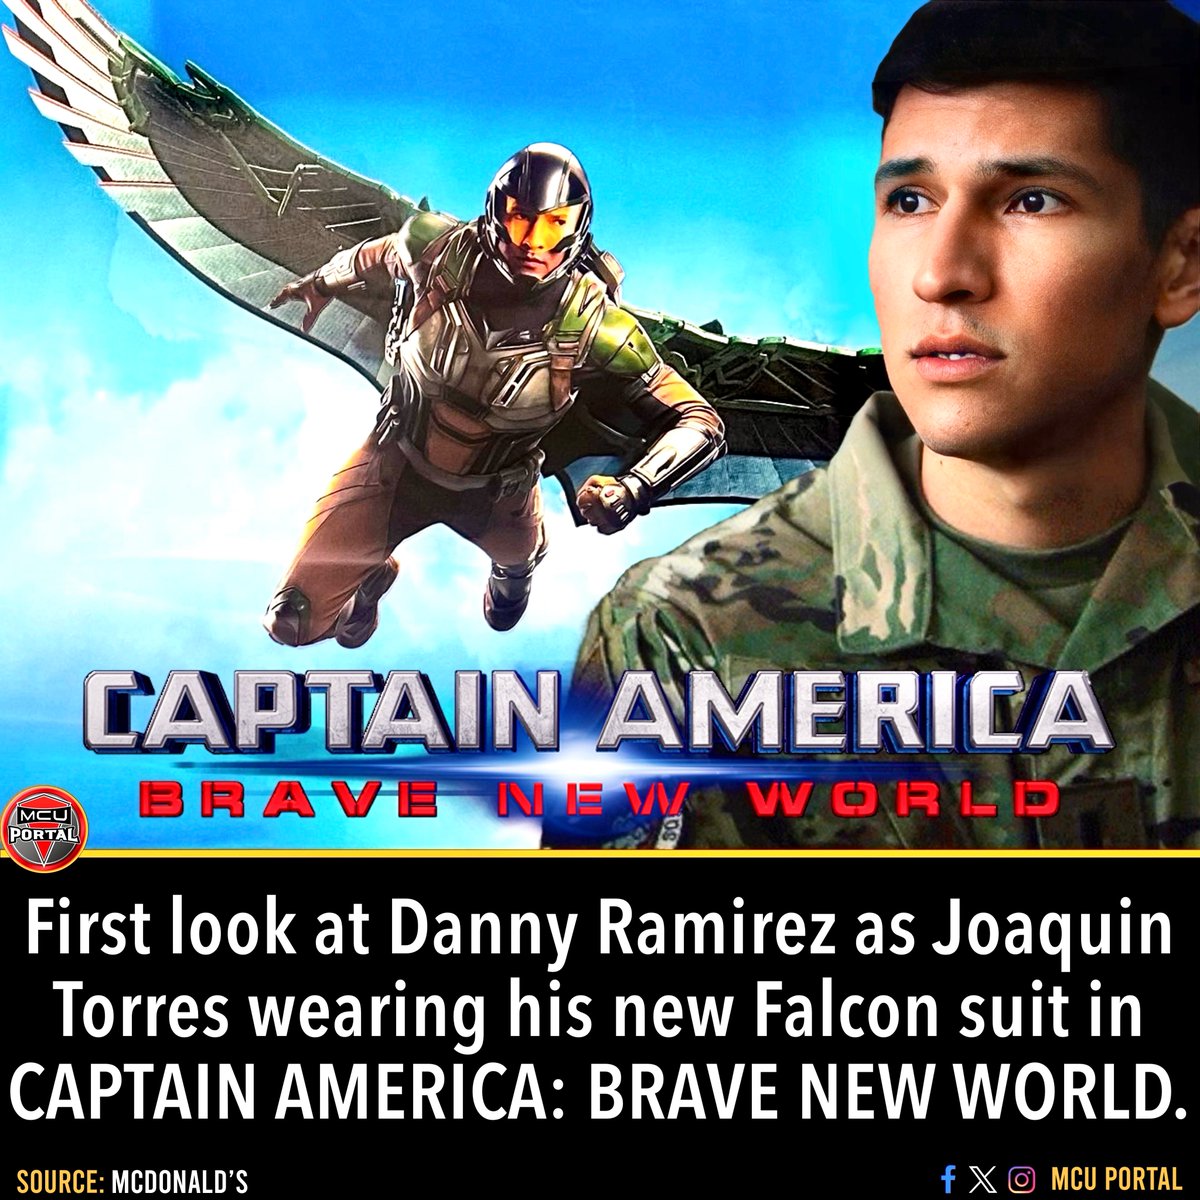 New McDonald’s promo gives us a first look at Joaquin Torres suited up as the new Falcon! 

CAPTAIN AMERICA: BRAVE NEW WORLD hits theaters February 14, 2025!

#thefalcon #captainamericabravenewworld